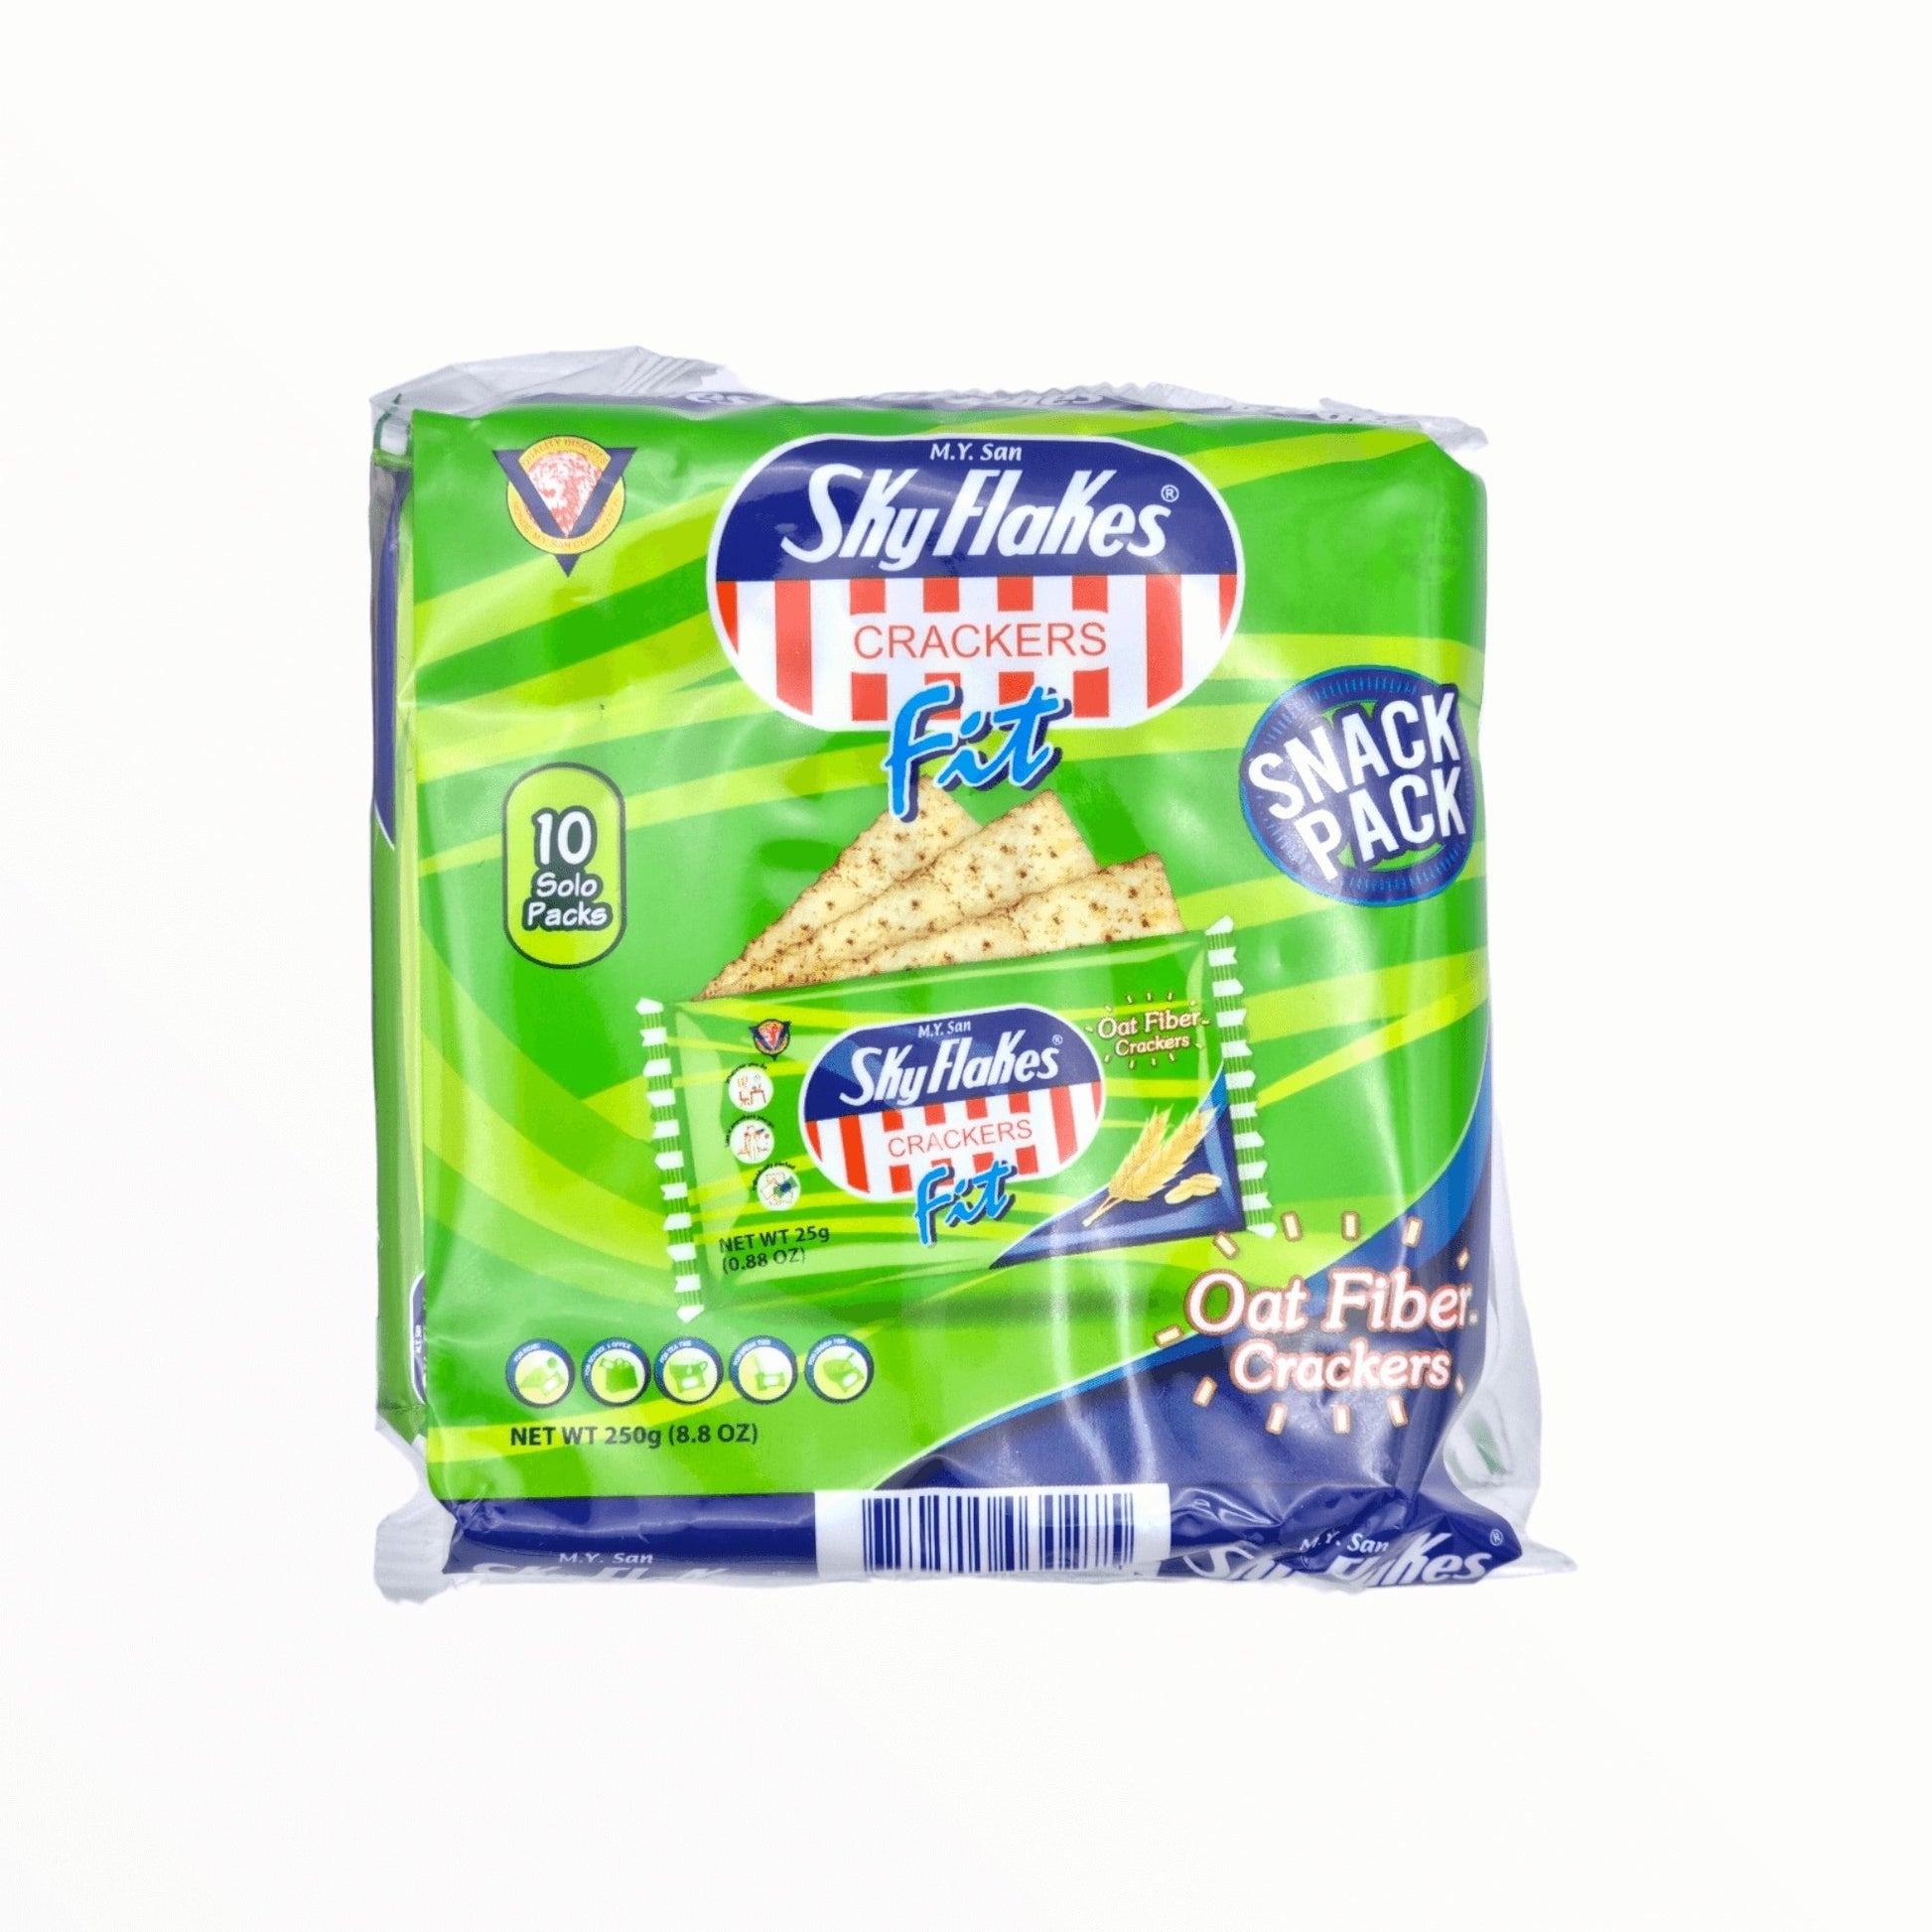 Sky Flakes Crackers "Fit" 10Stk. - Mabuhay Pinoy Asia Shop